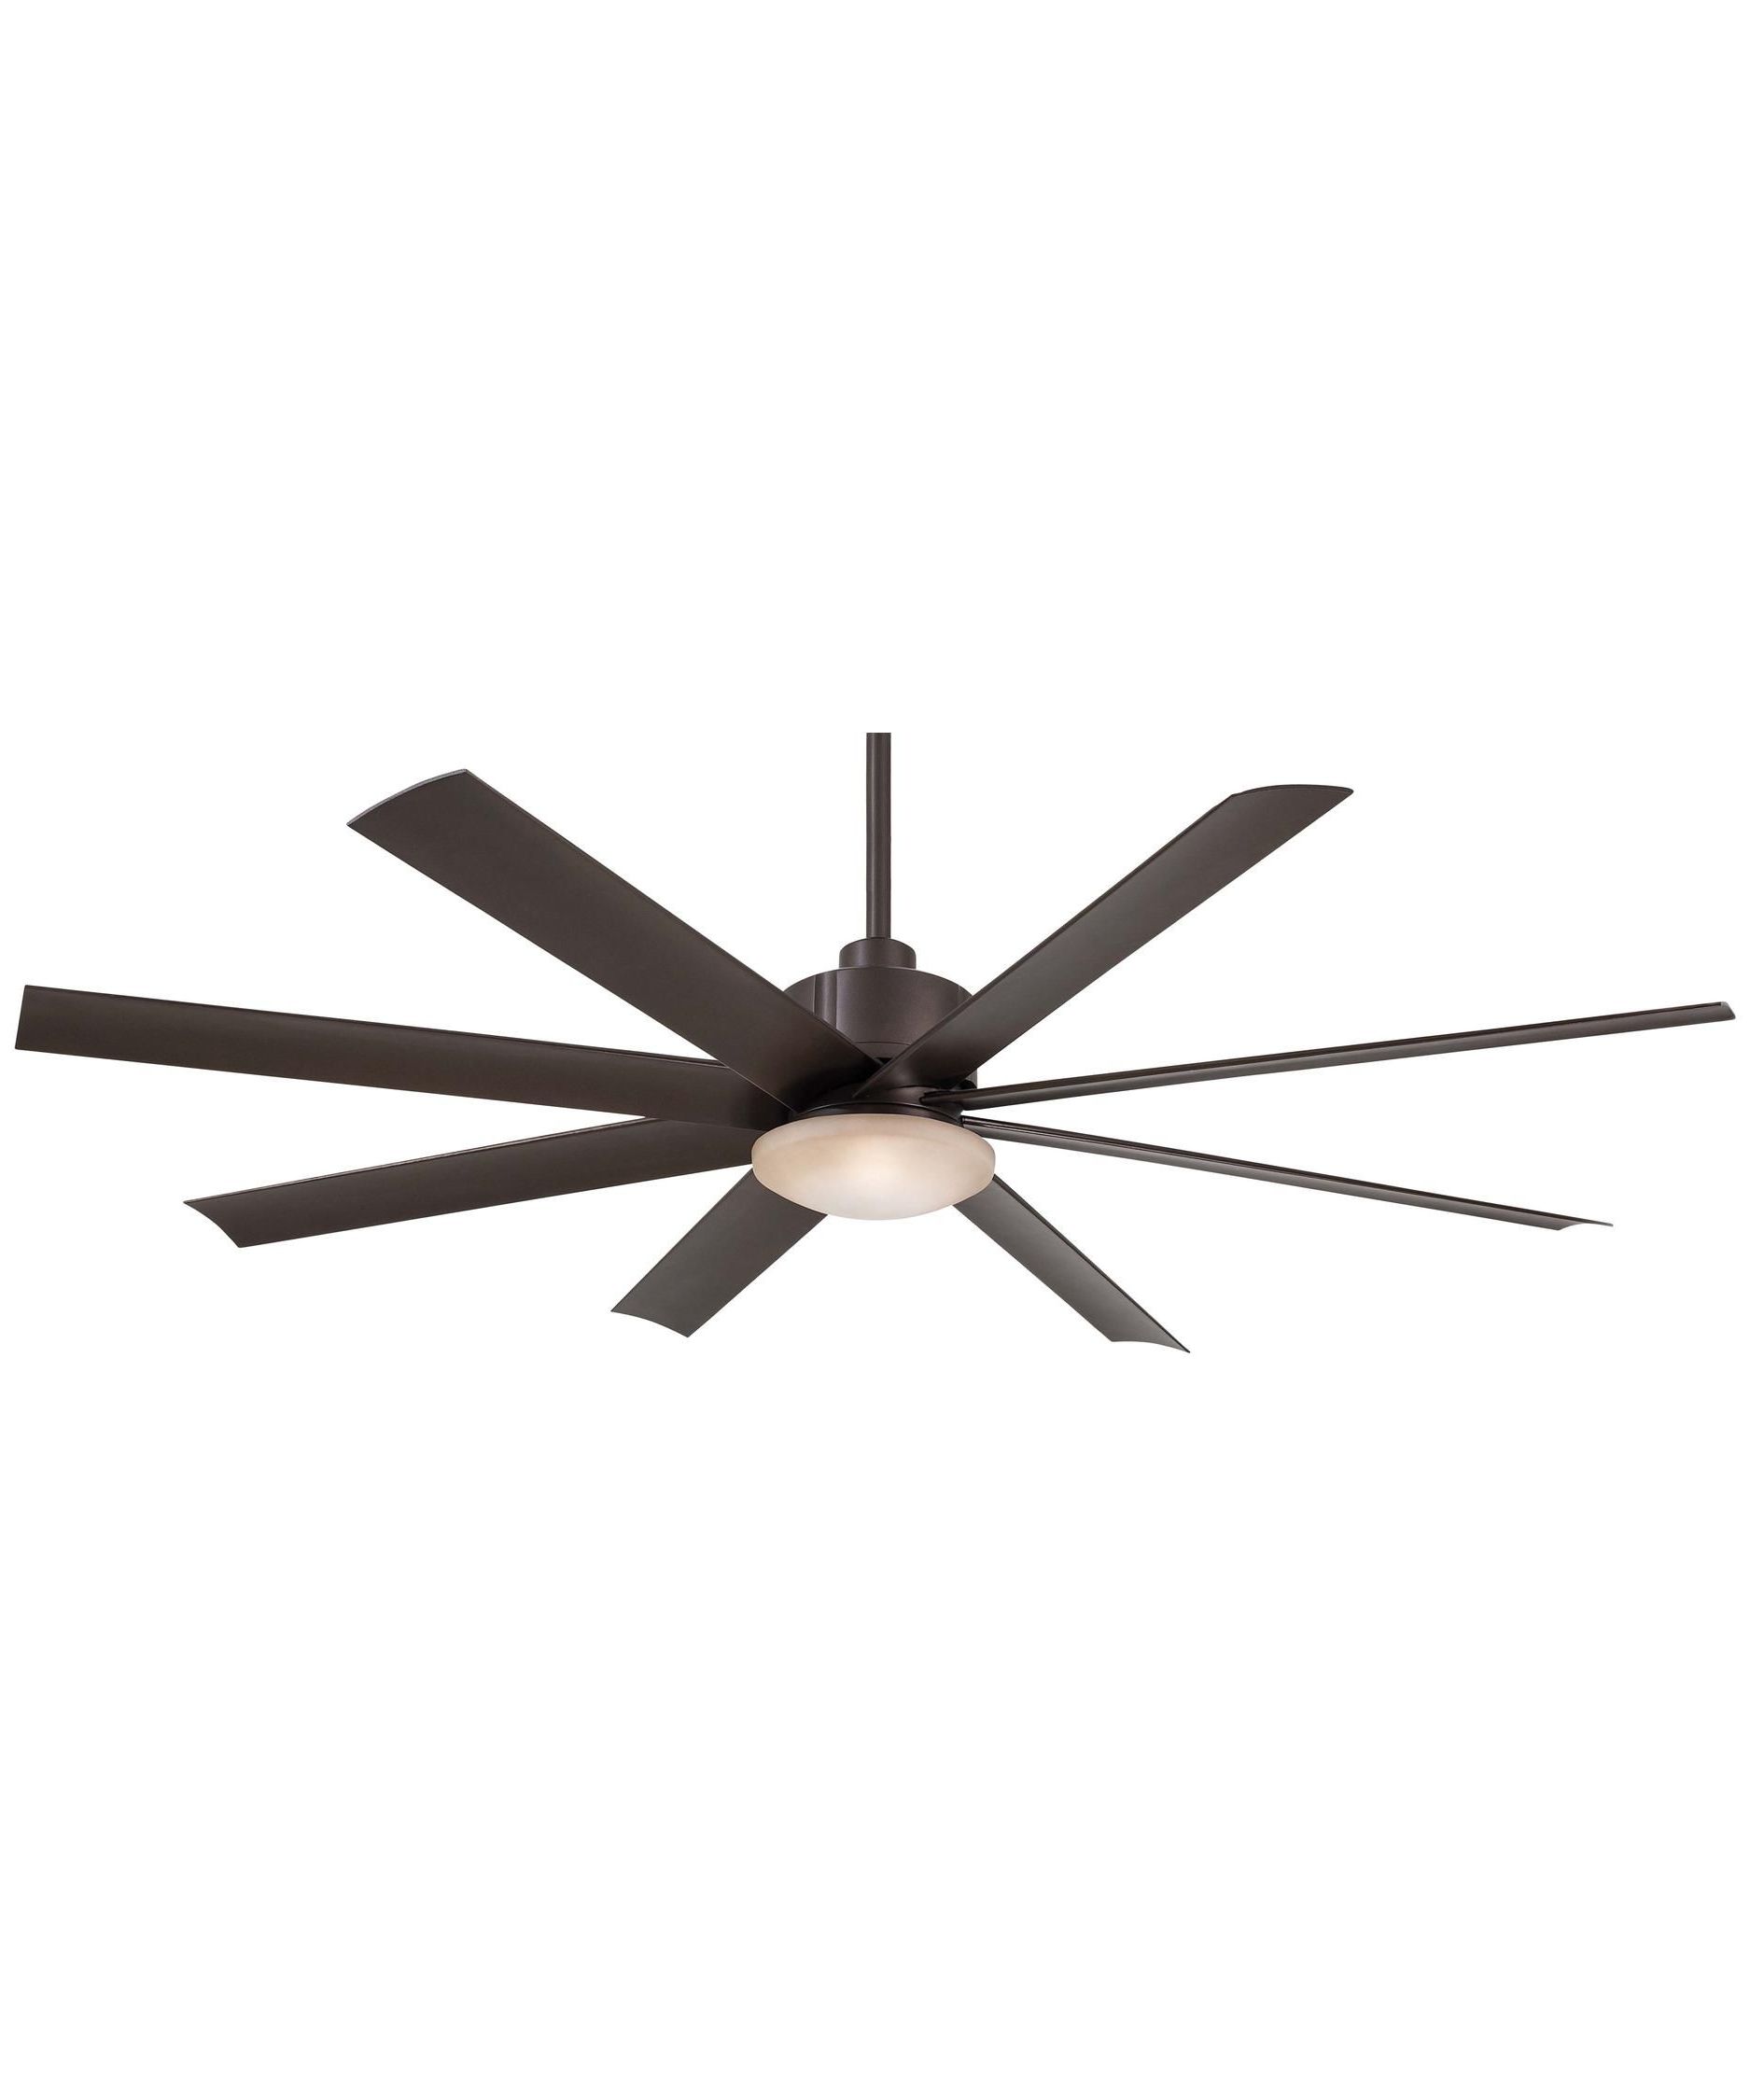 Most Popular Minka Aire F888 Slipstream 65 Inch 8 Blade Ceiling Fan Pertaining To Aker 3 Blade Led Ceiling Fans (View 12 of 20)